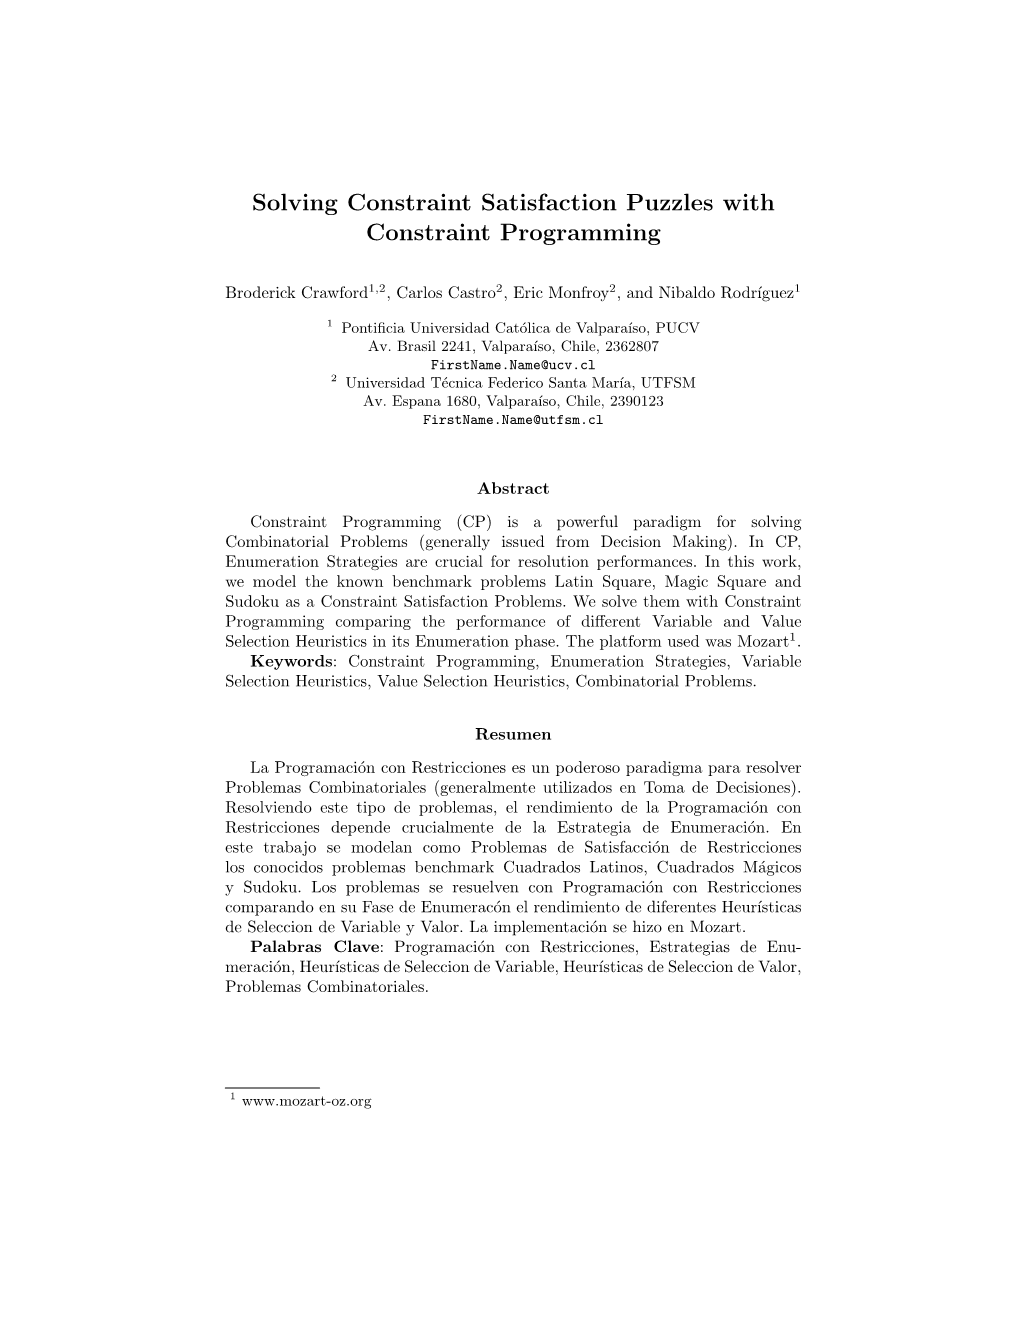 Solving Constraint Satisfaction Puzzles with Constraint Programming